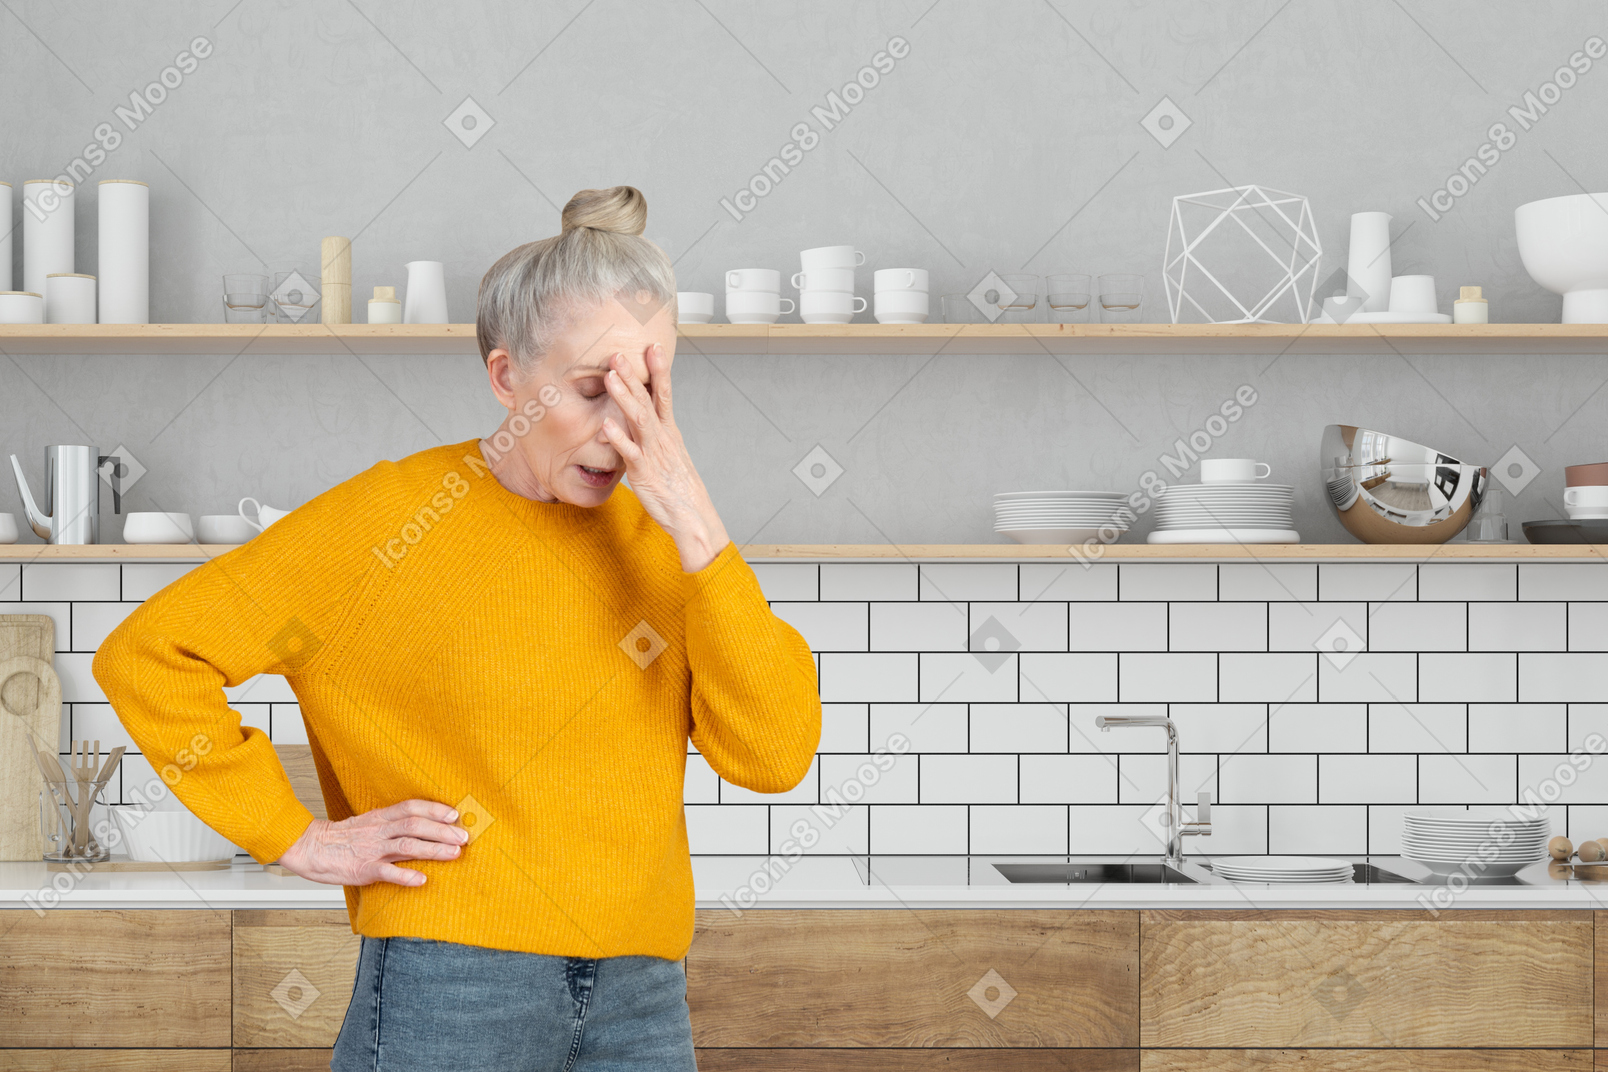 A woman standing in a kitchen holding her head